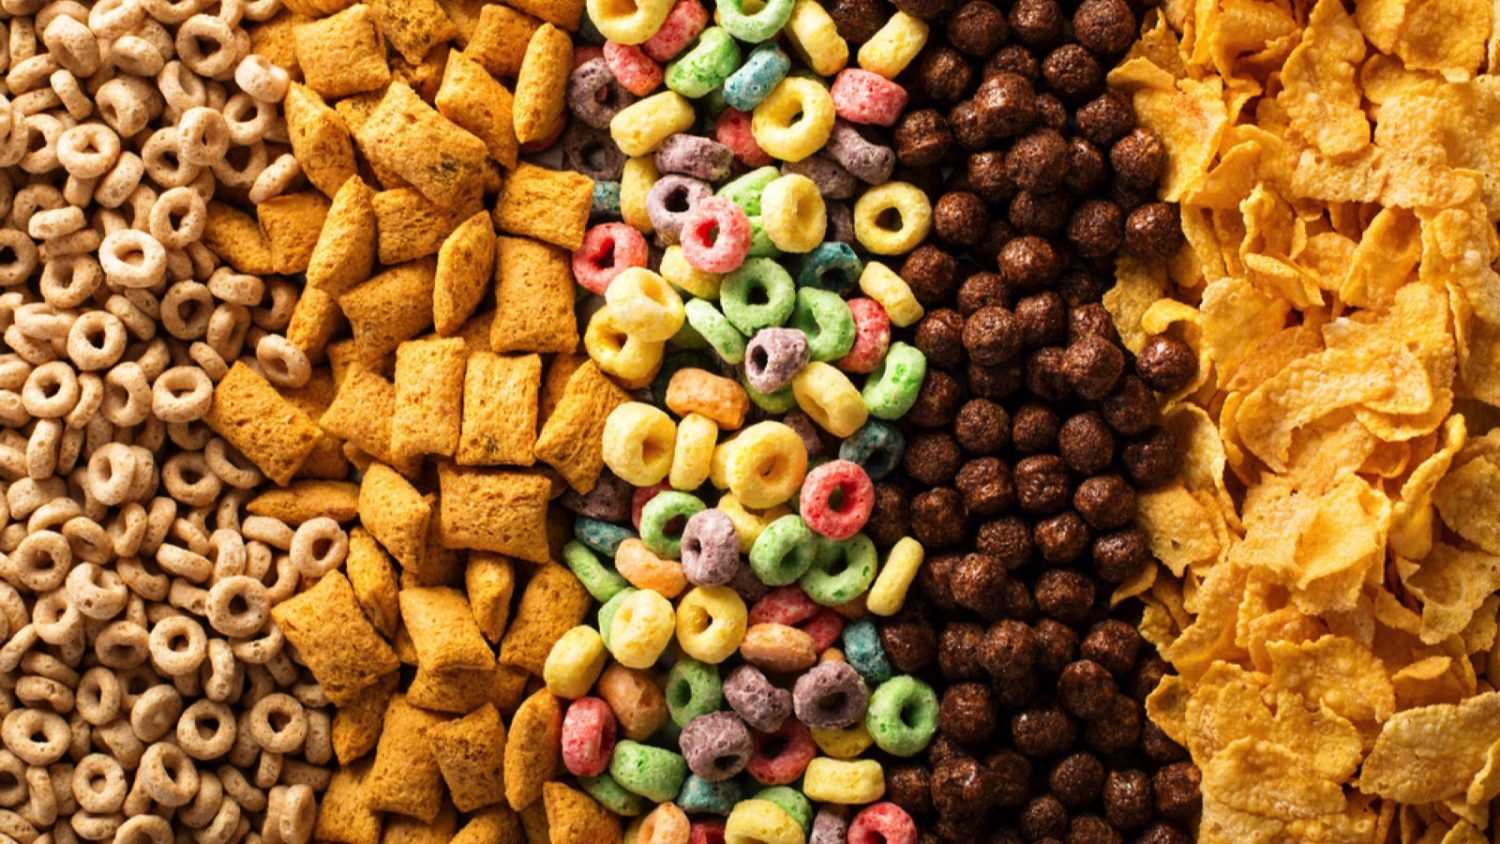 Different types of cereal